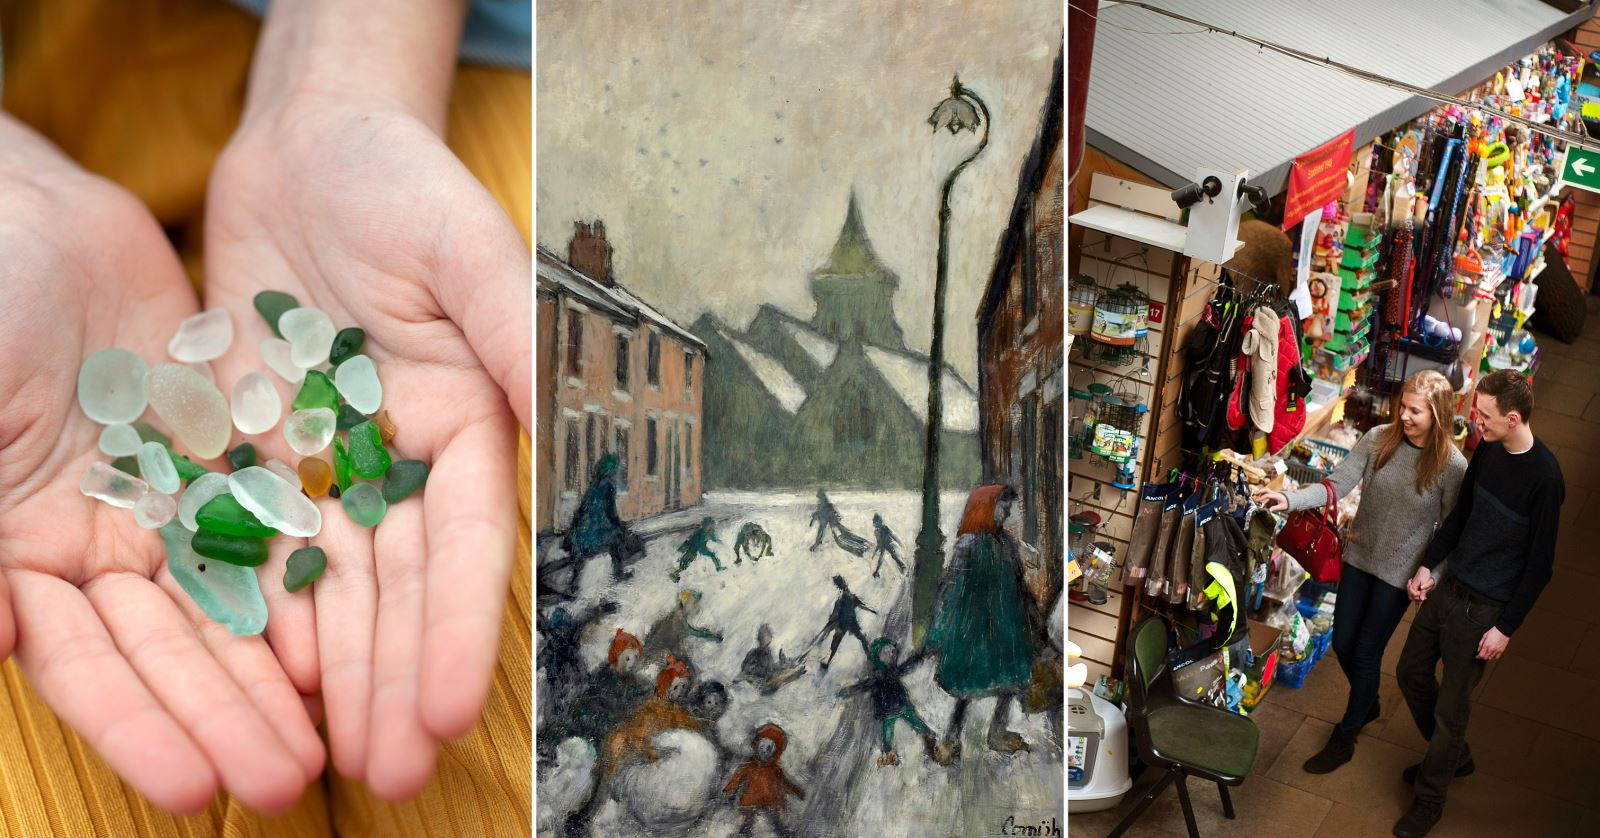 left to right - child's hands holding sea glass, painting by Norman Cornish and couple walking through Durham indoor market